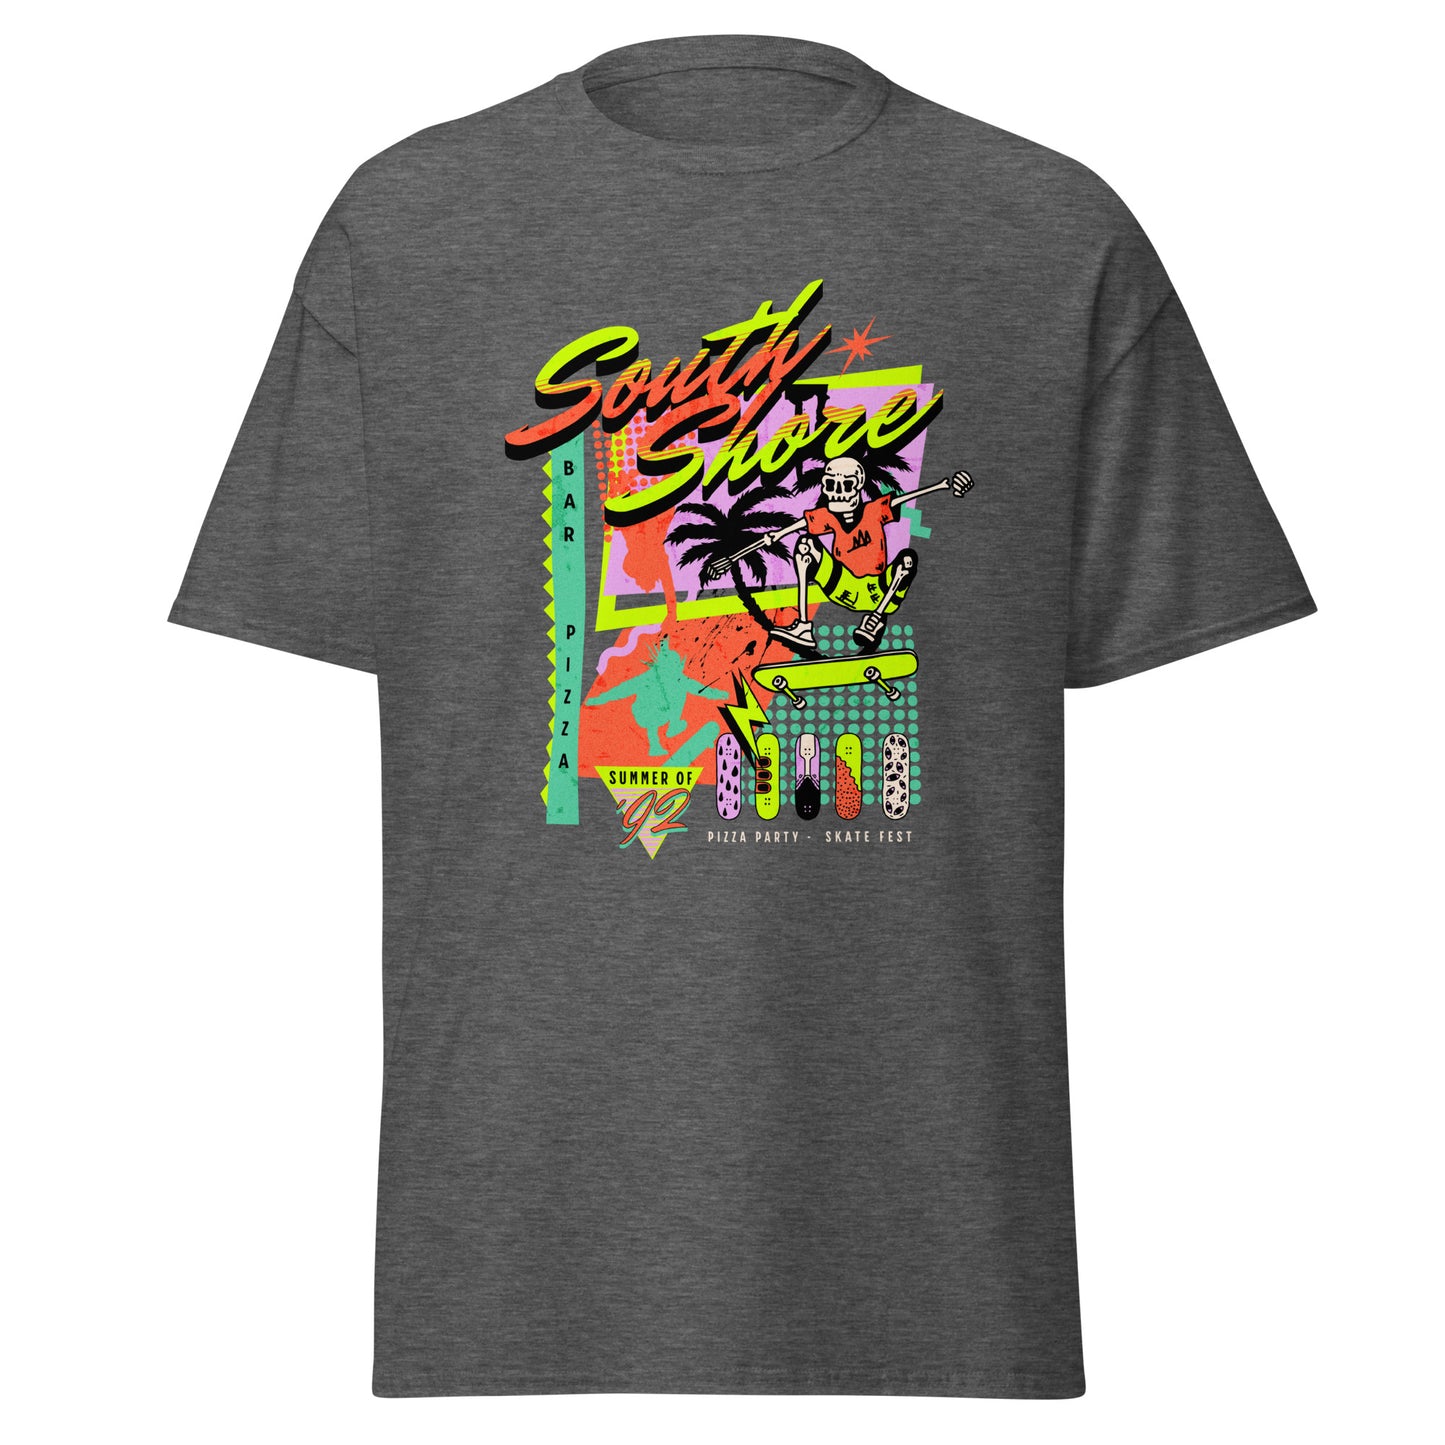 Summer 1992 South Shore Bar Pizza Skate Fest Pizza Party Tee